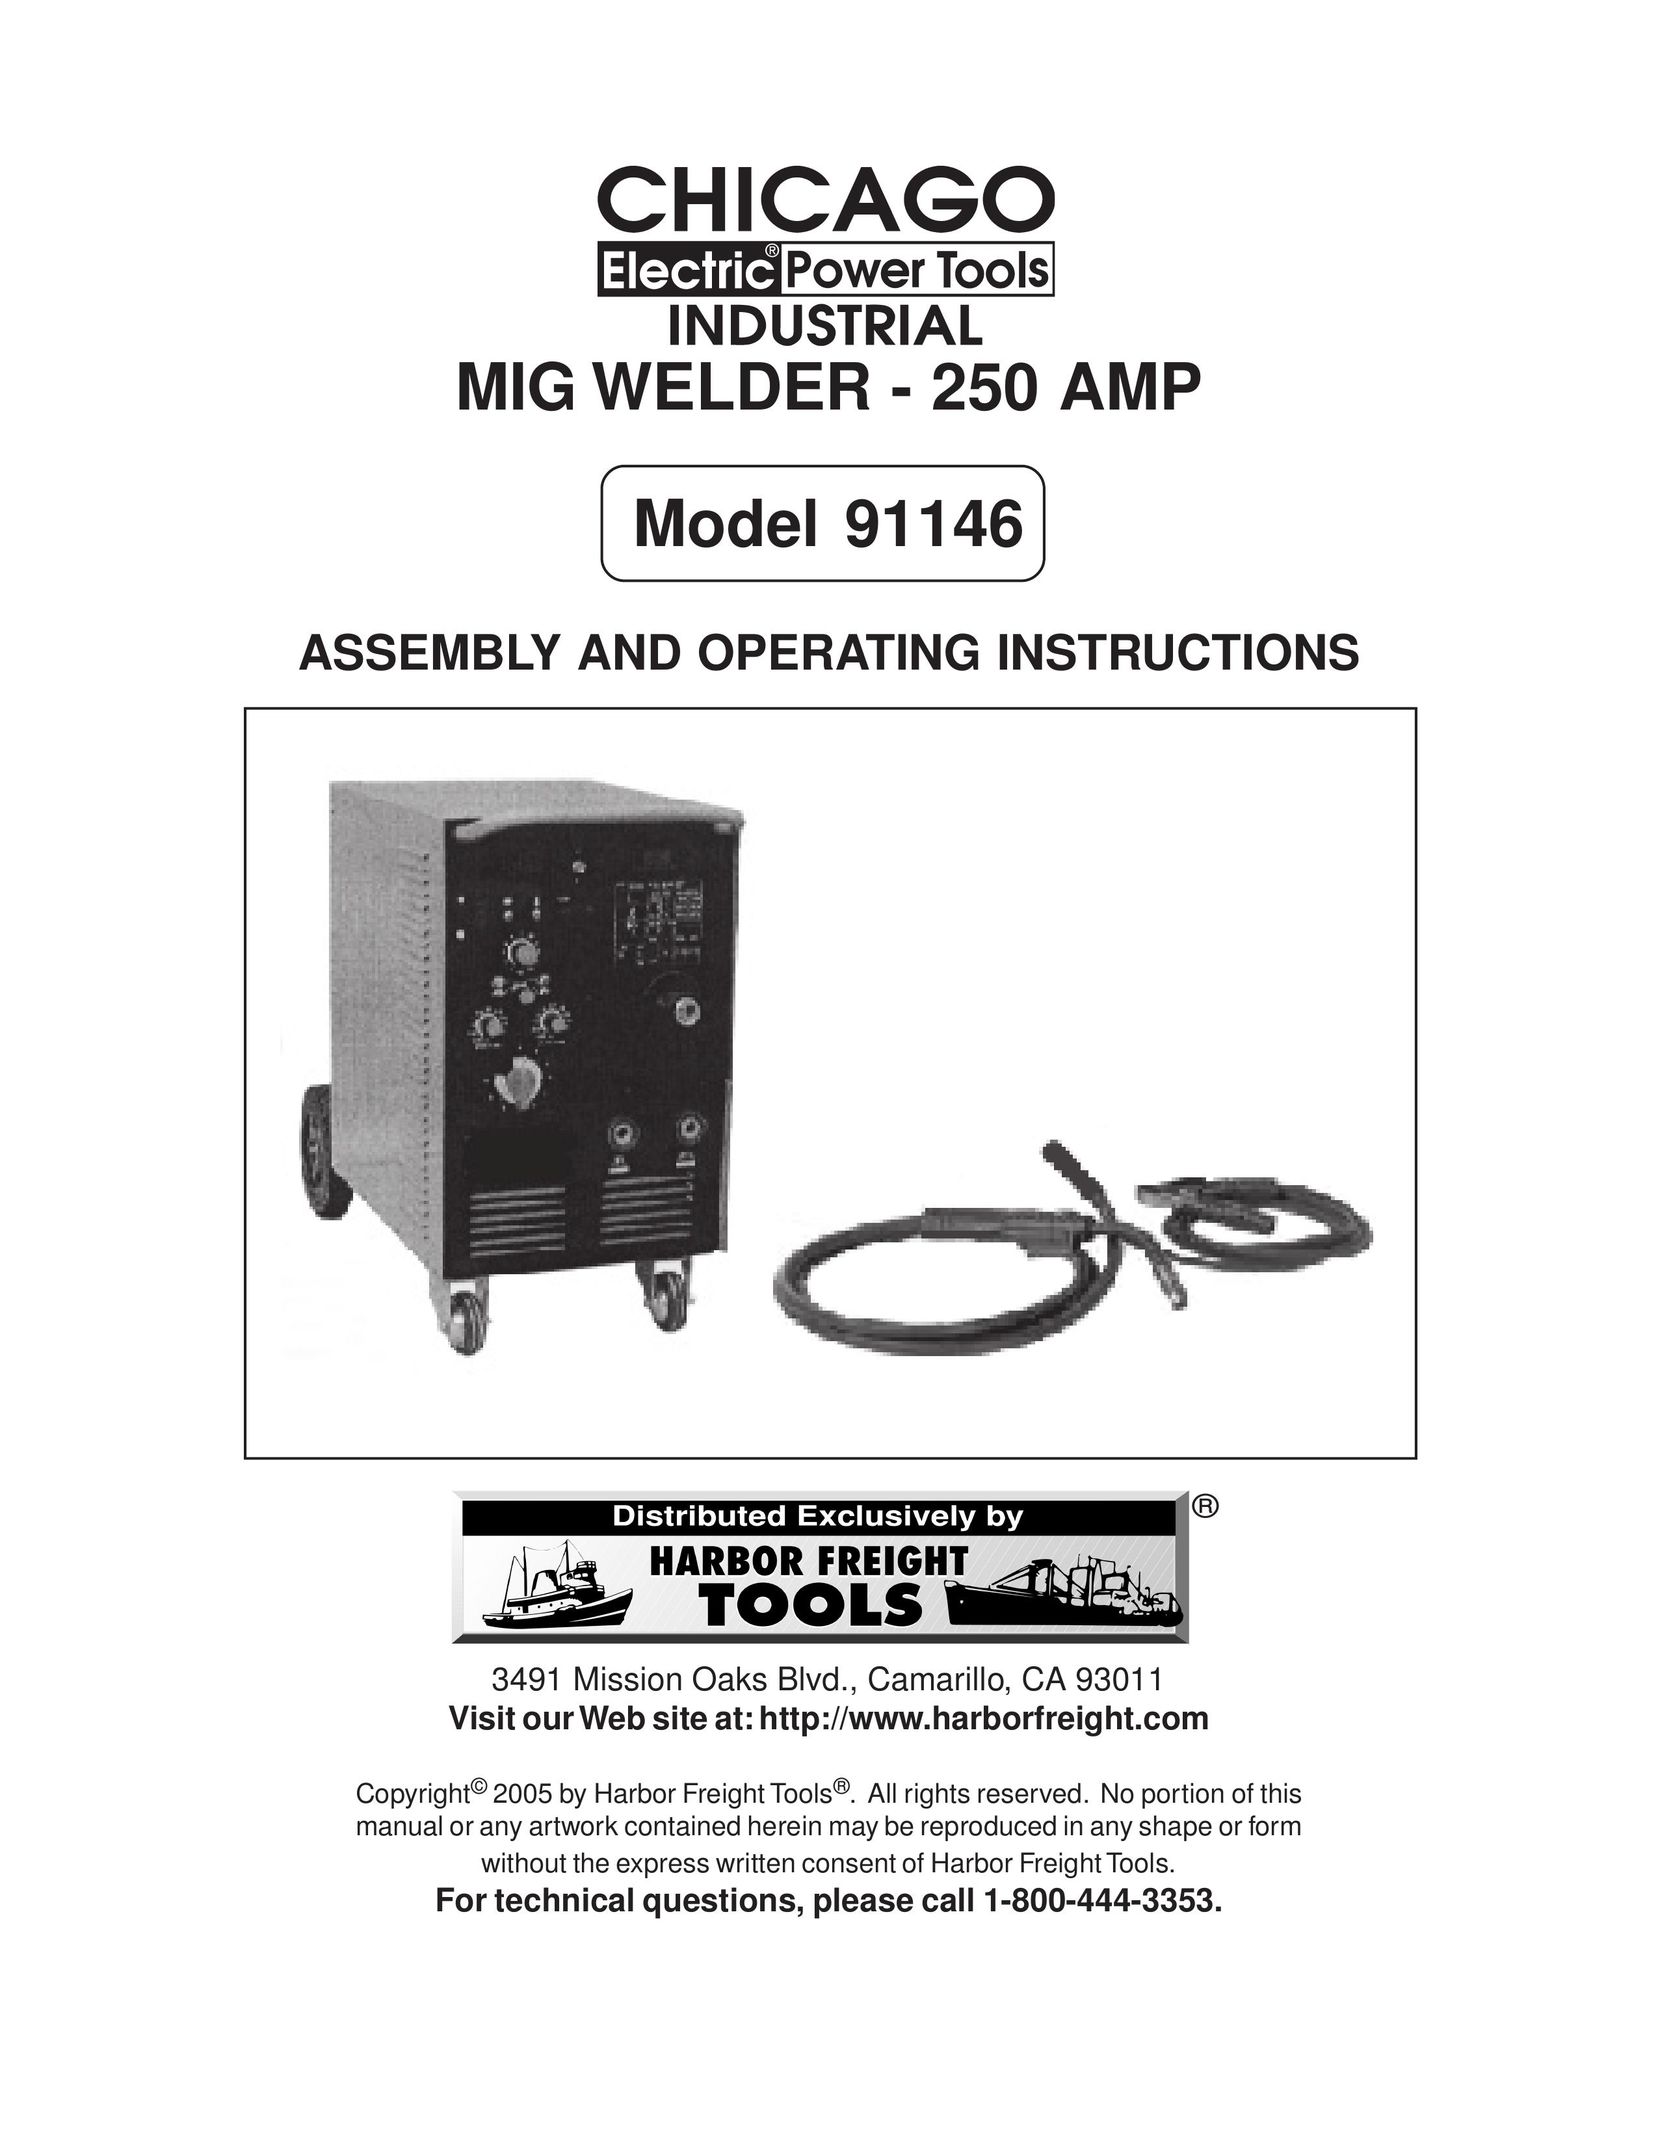 Harbor Freight Tools 91146 Welding Consumables User Manual